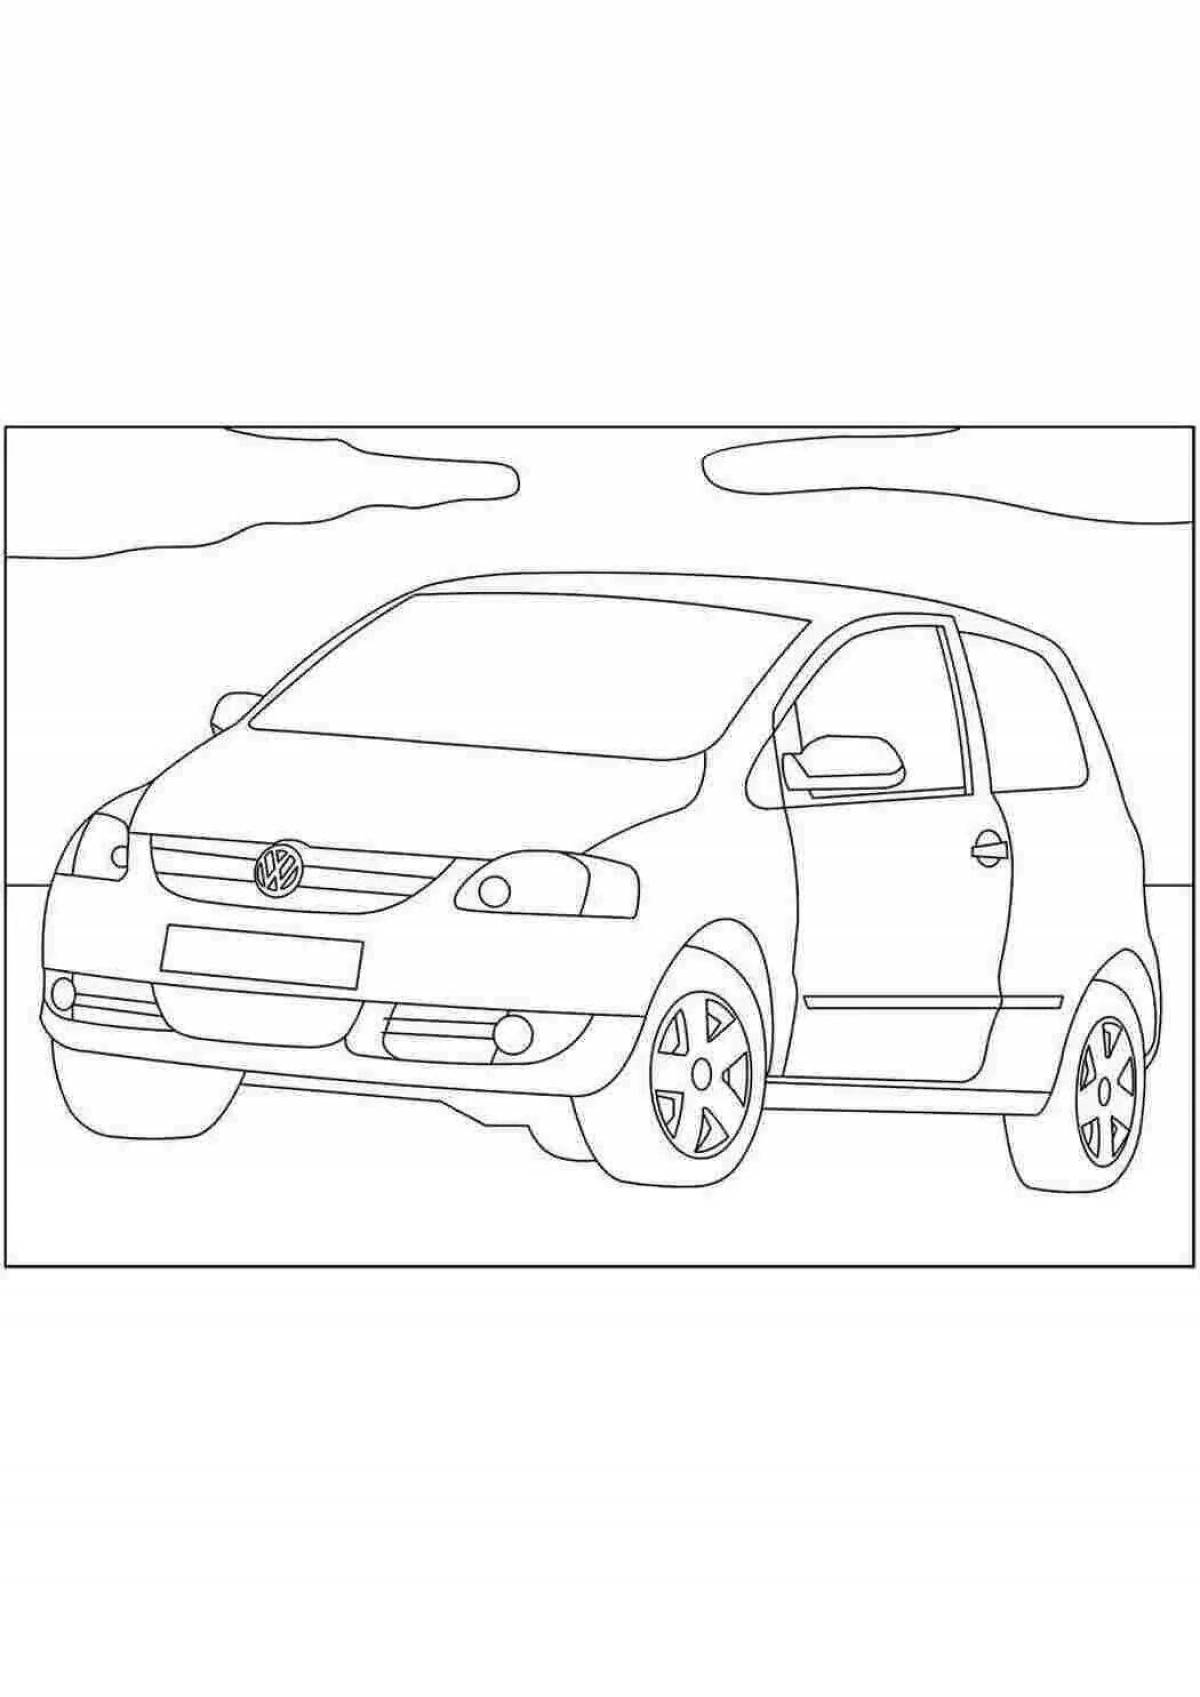 Coloring page amazing volkswagen cars